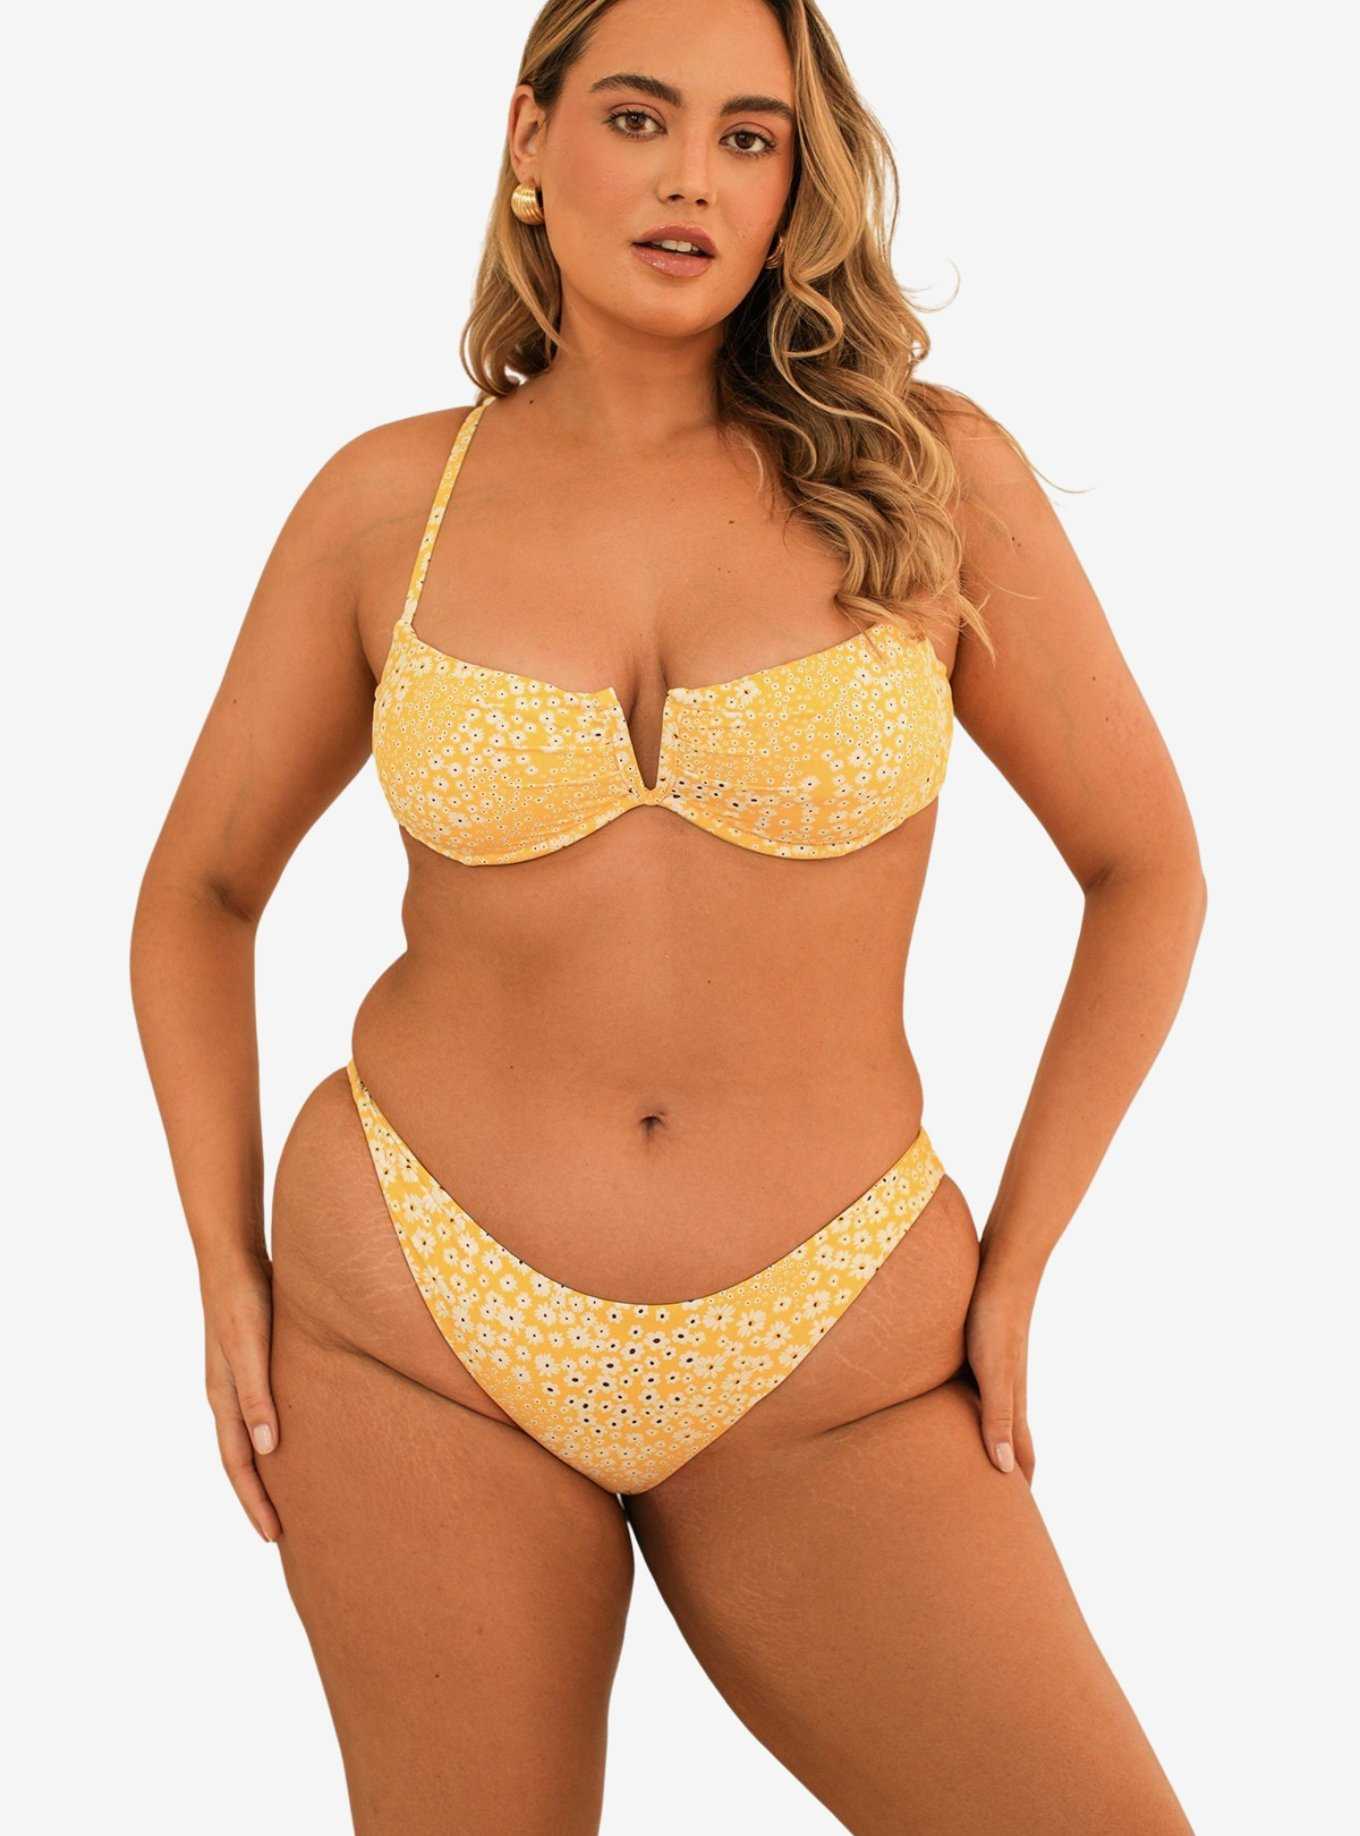 Dippin' Daisy's Diana Underwire Swim Top Golden Ditsy, , hi-res